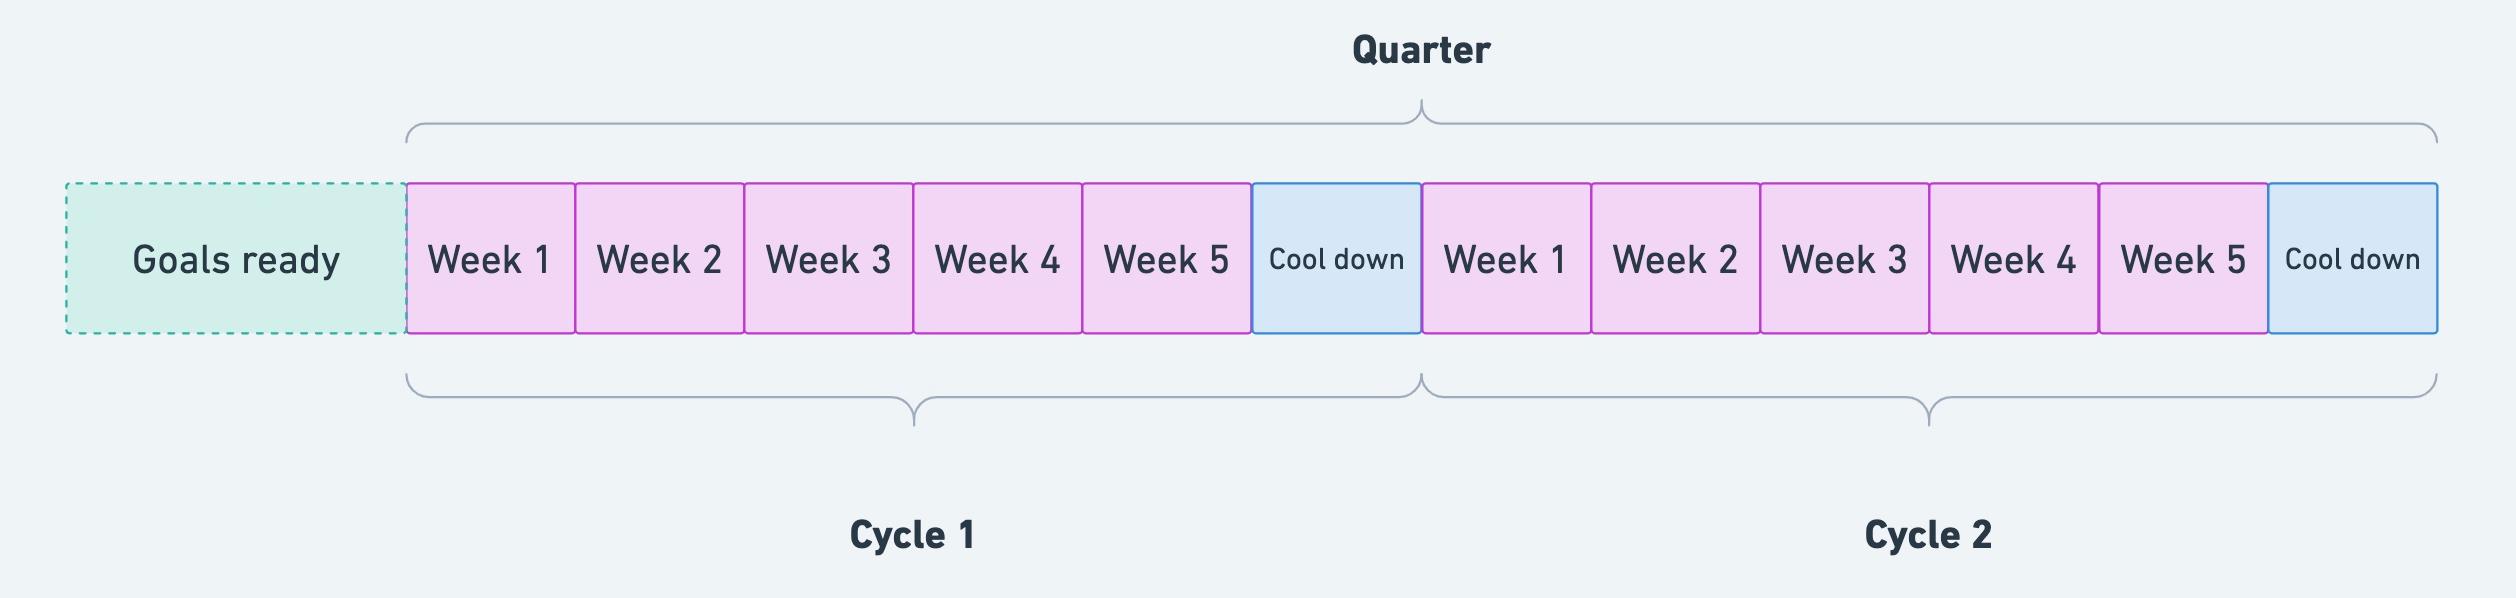 Calendar showing two weeks before the first cycle when the goals are ready, and the quarter broken down into two five week cycles, with one week of cooldown after each.